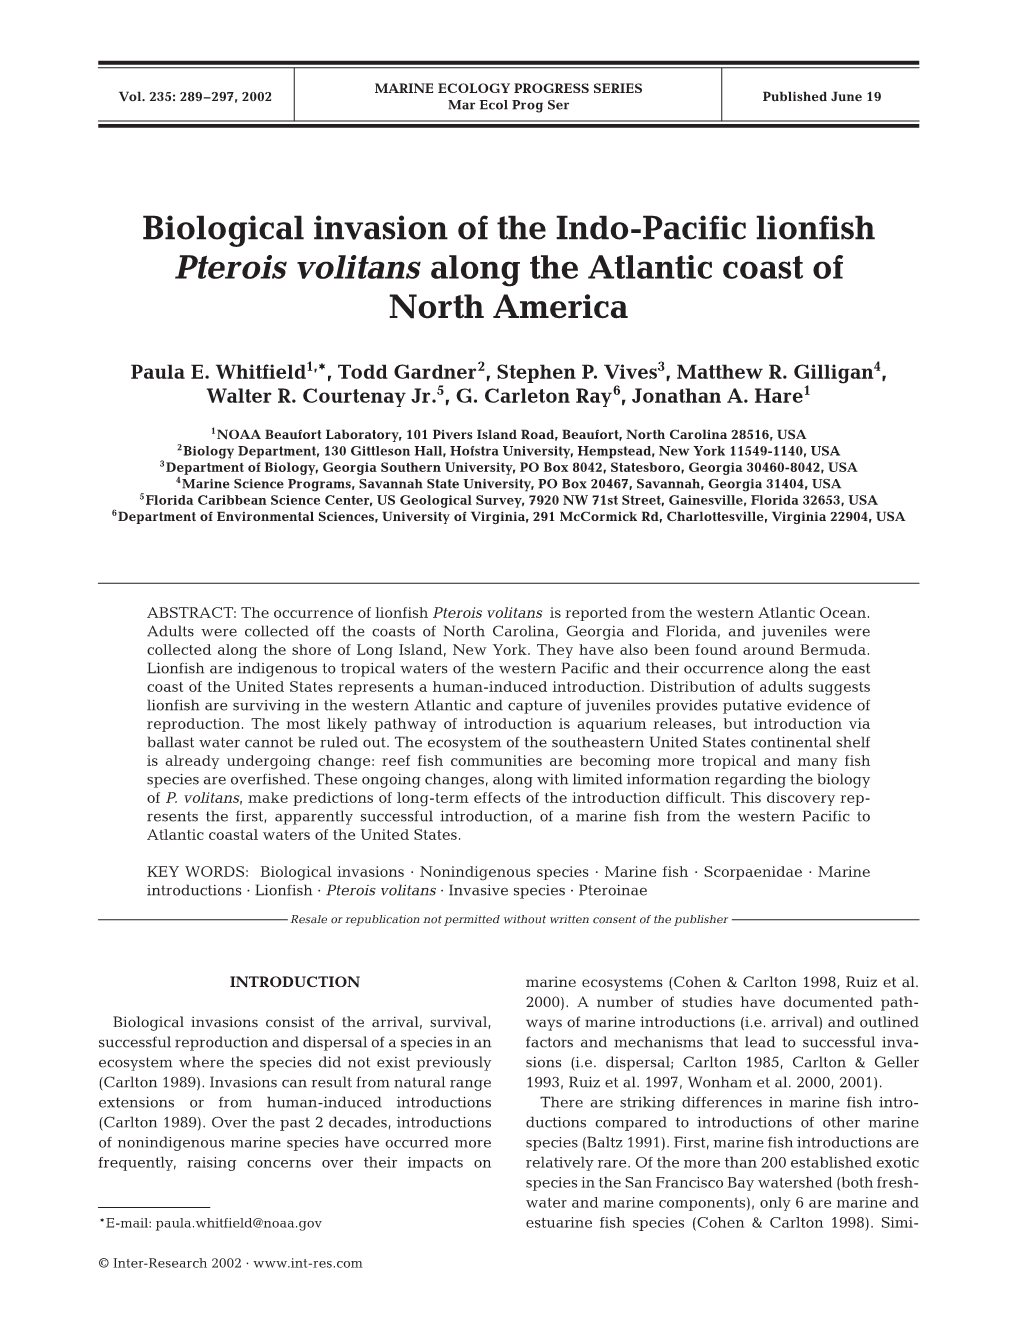 Biological Invasion of the Indo-Pacific Lionfish Pterois Volitans Along the Atlantic Coast of North America